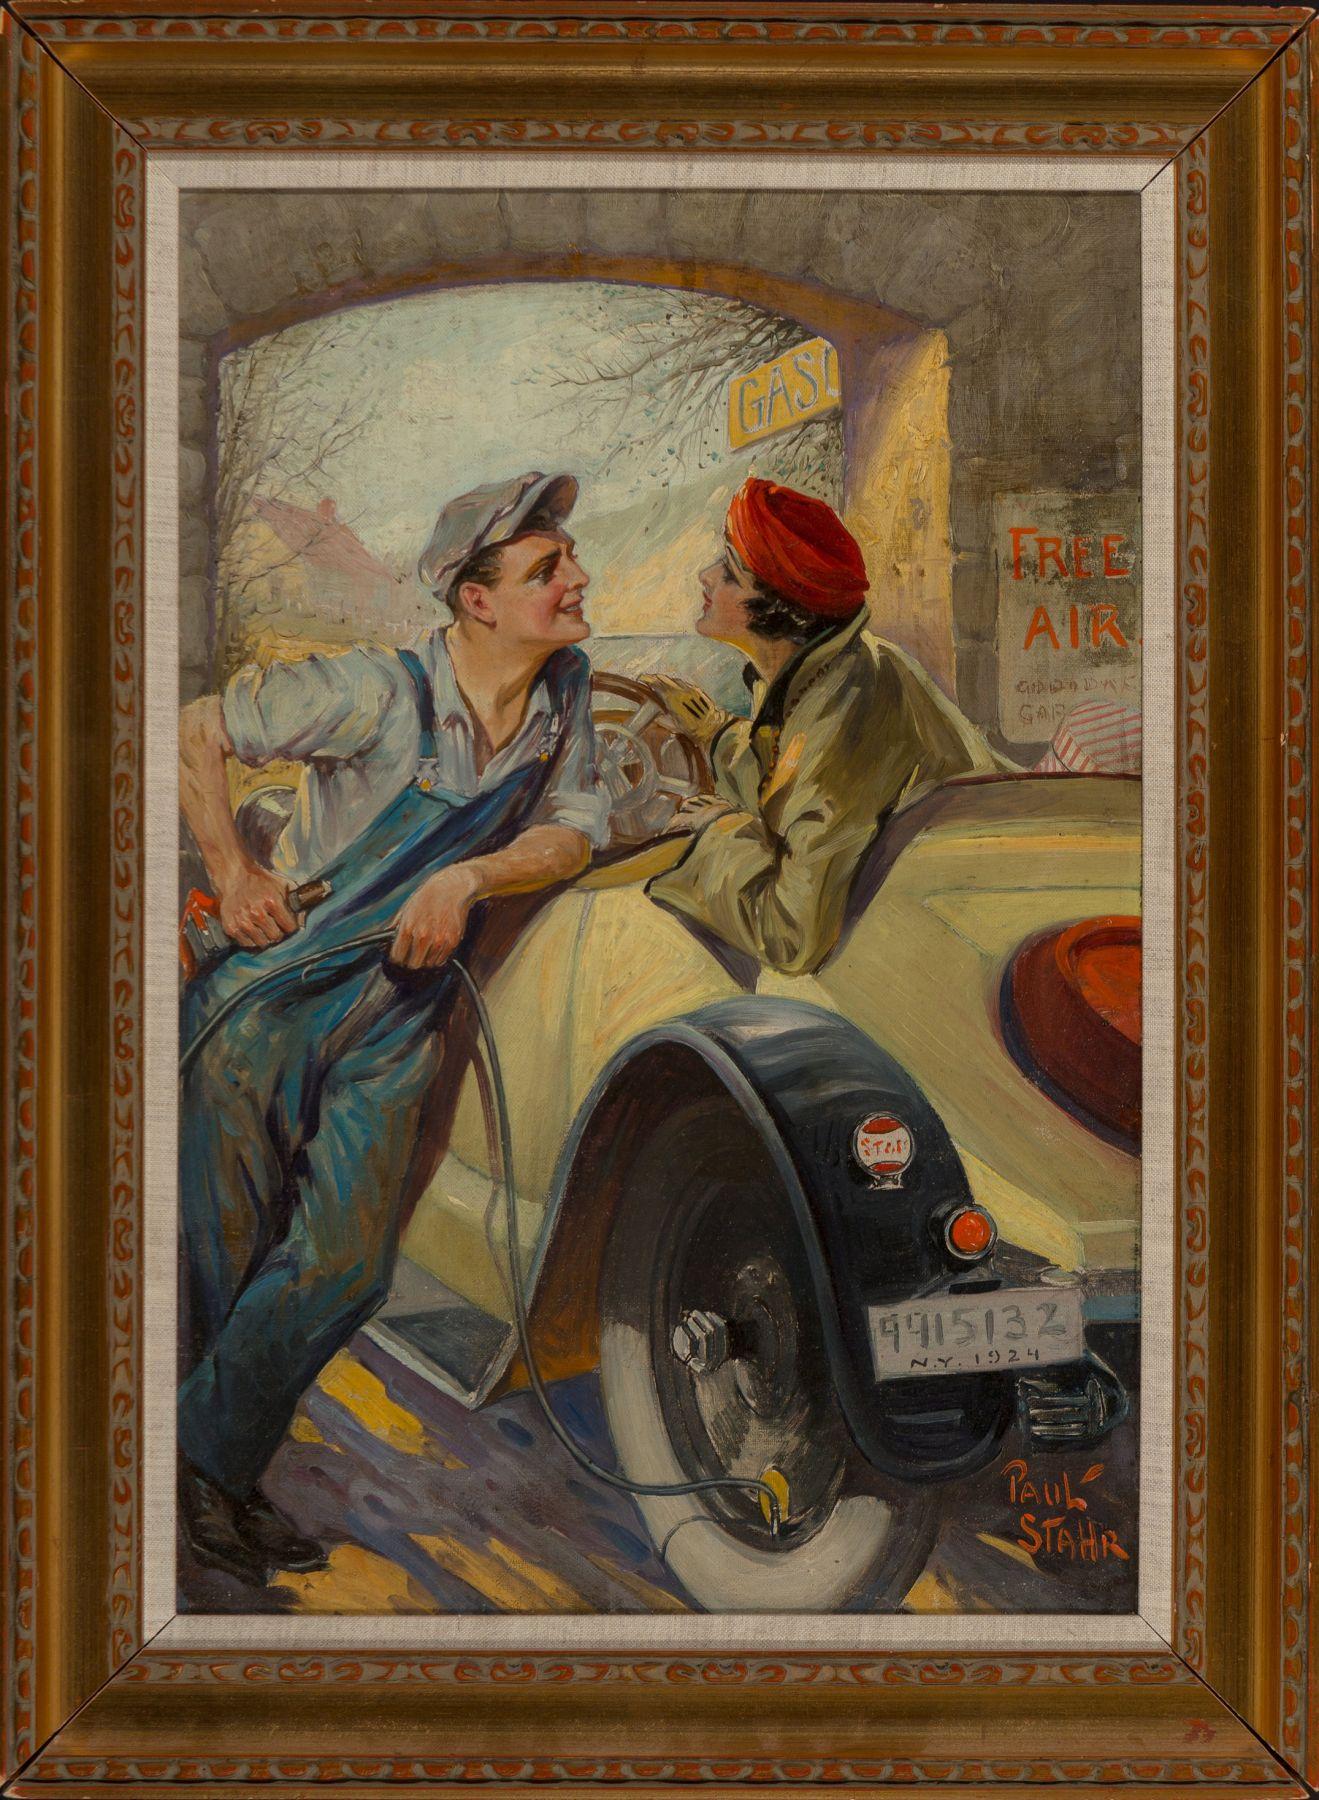 Filling Station - Painting by Paul C. Stahr